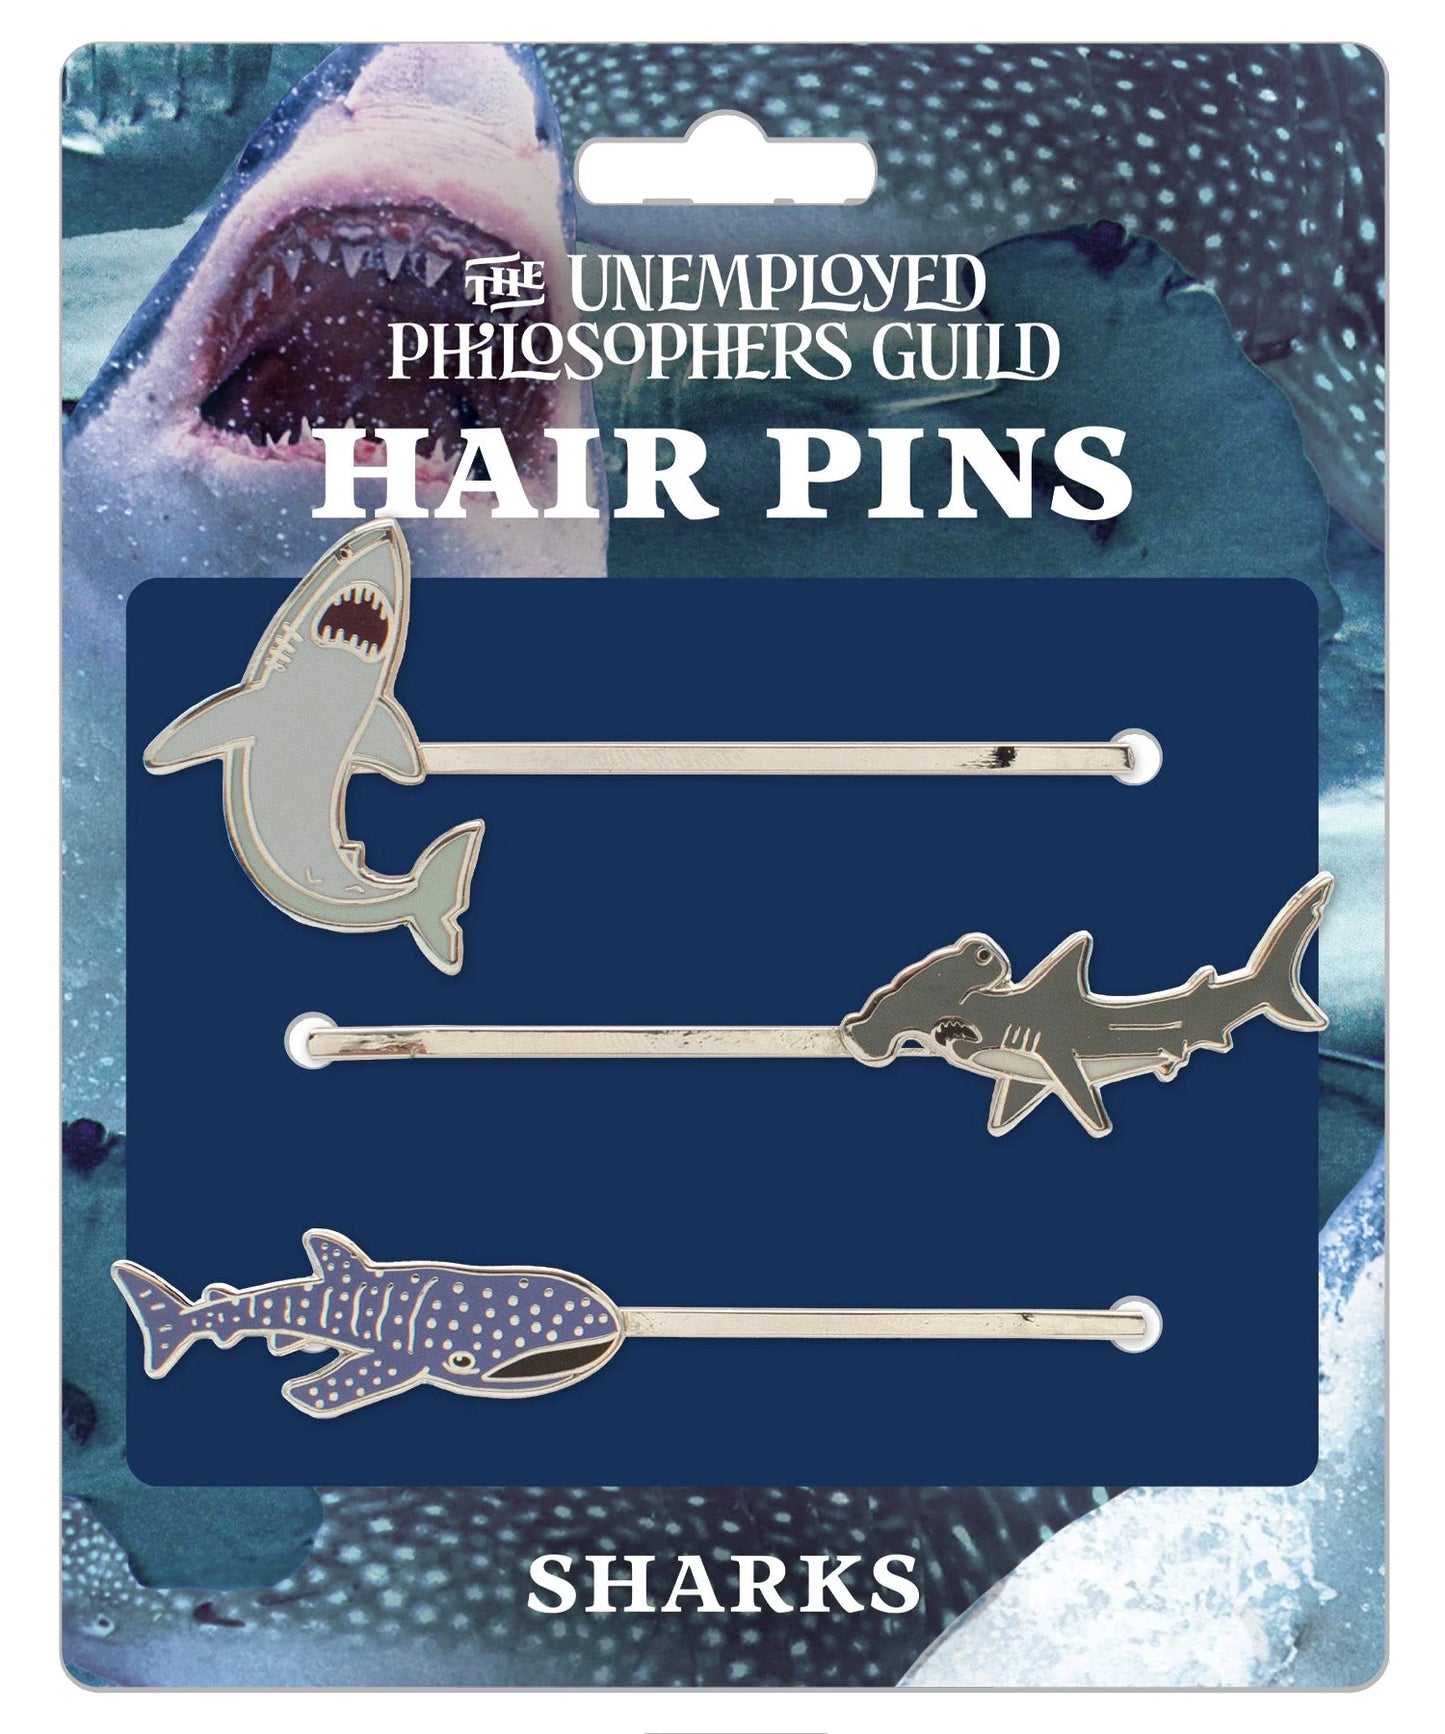 Shark Hair Pins from Unemployed Philosophers Guild